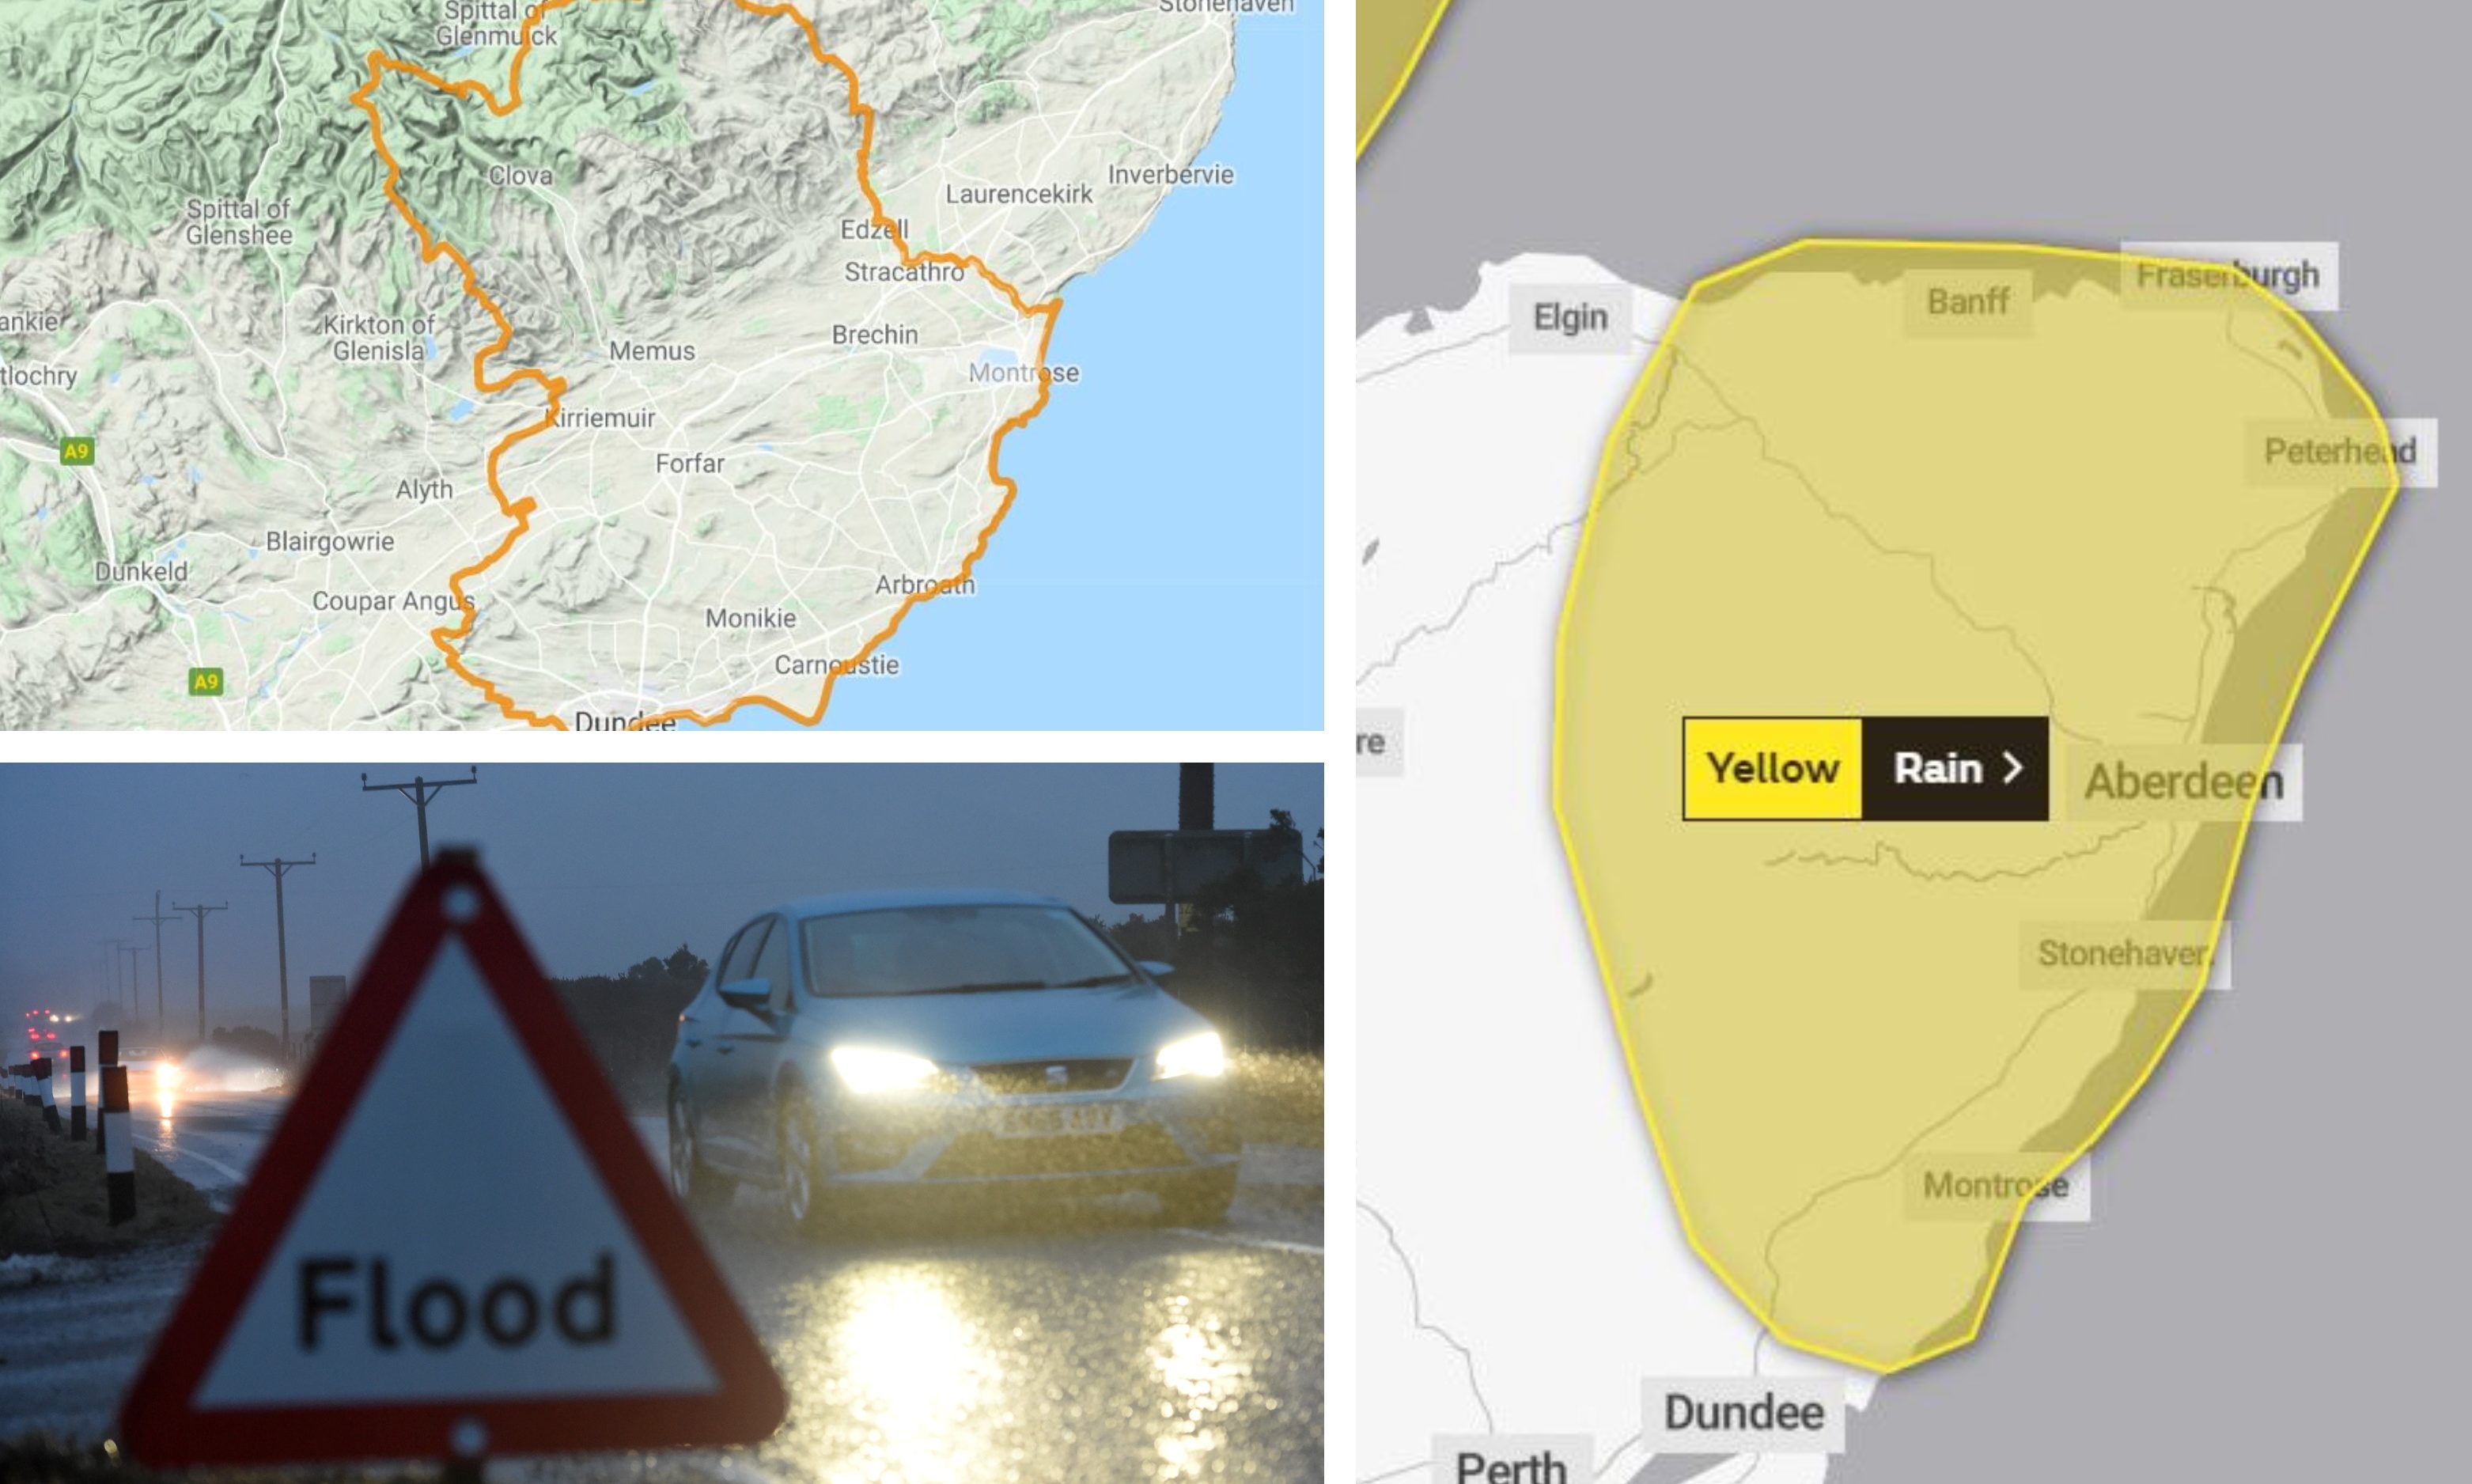 Flood and weather warnings have been issued for Angus.